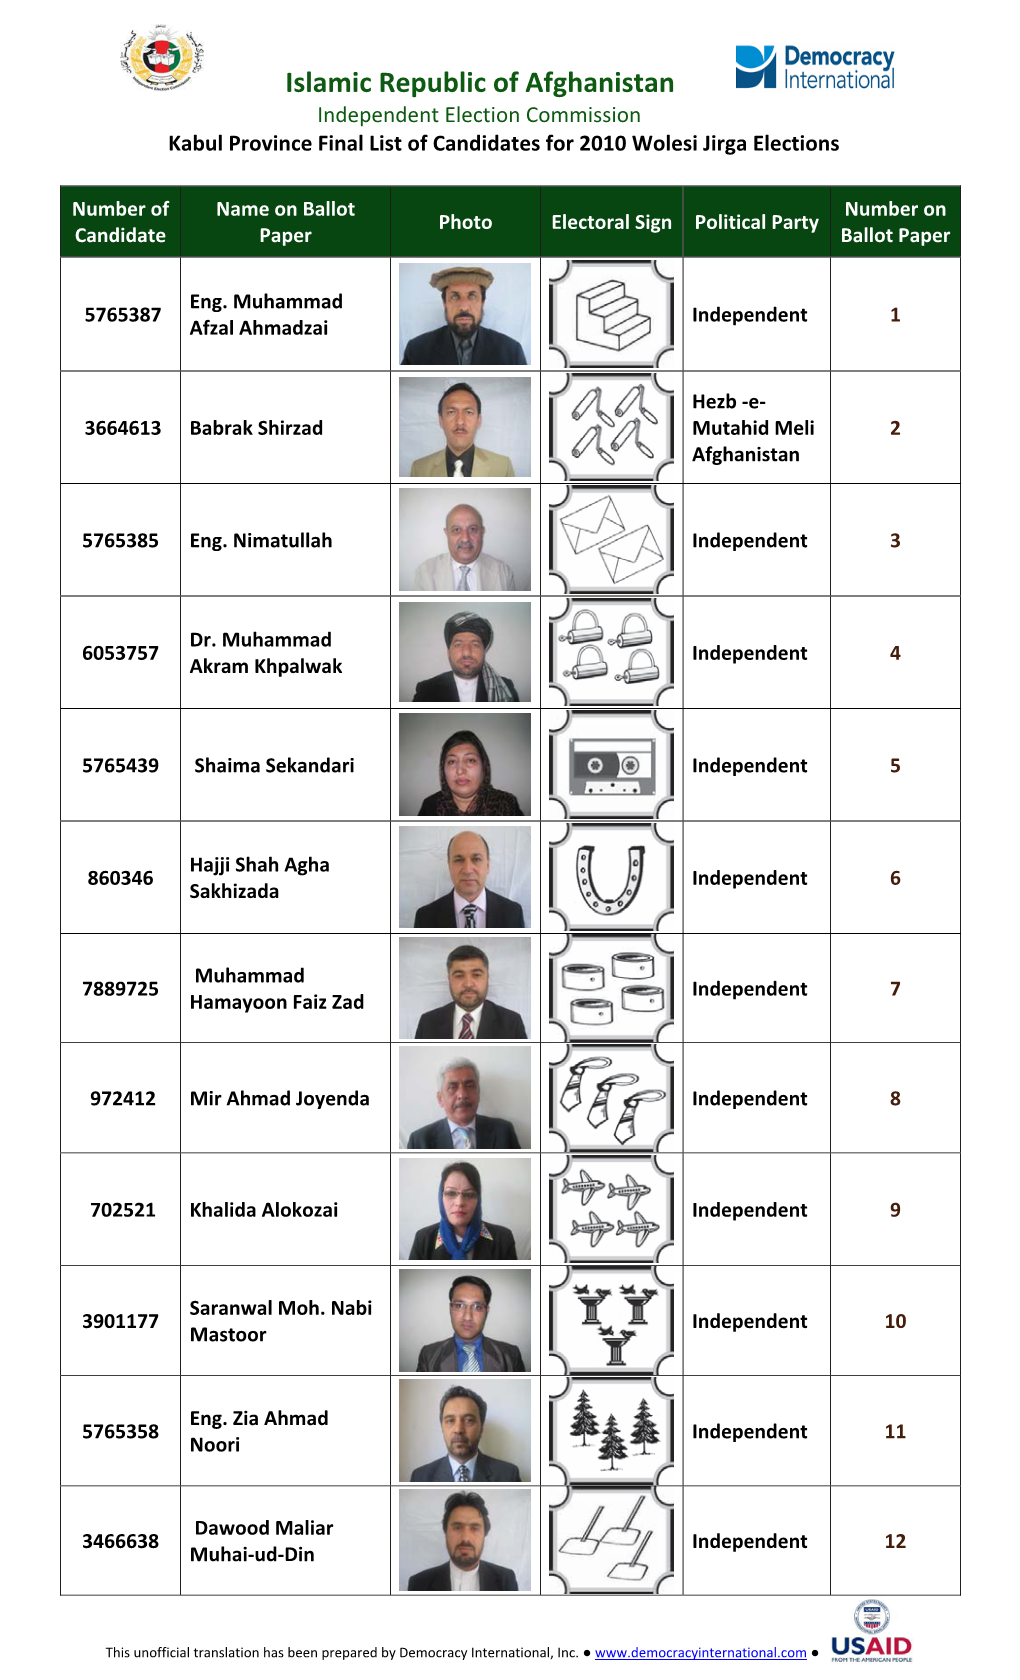 Islamic Republic of Afghanistan Independent Election Commission Kabul Province Final List of Candidates for 2010 Wolesi Jirga Elections